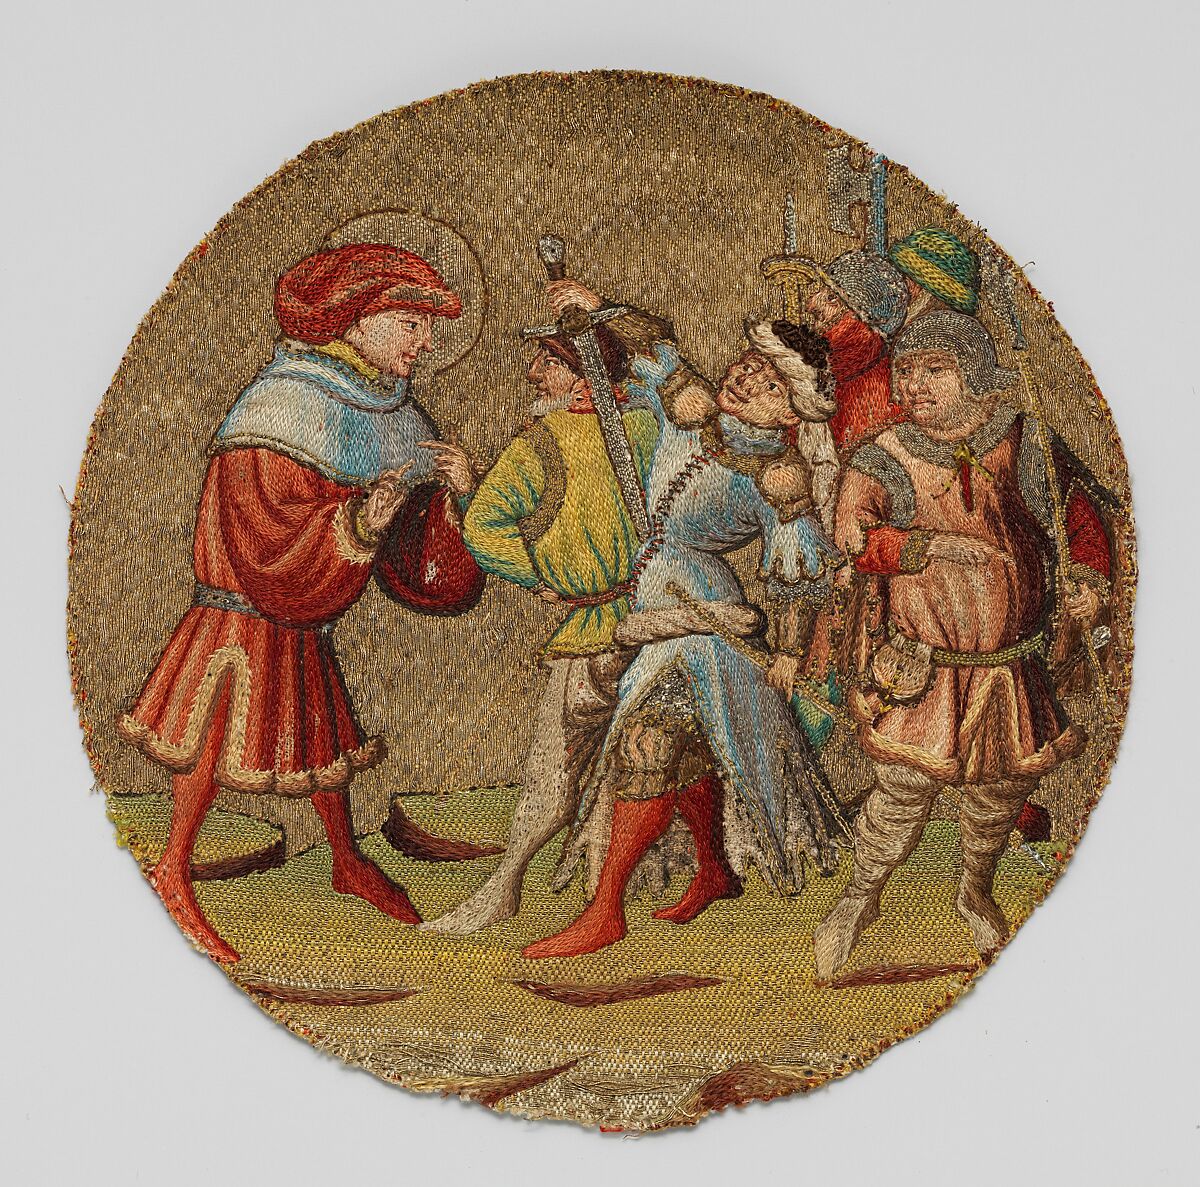 Saint Martin and the Brigands, Silk and metal thread on linen, South Netherlandish 